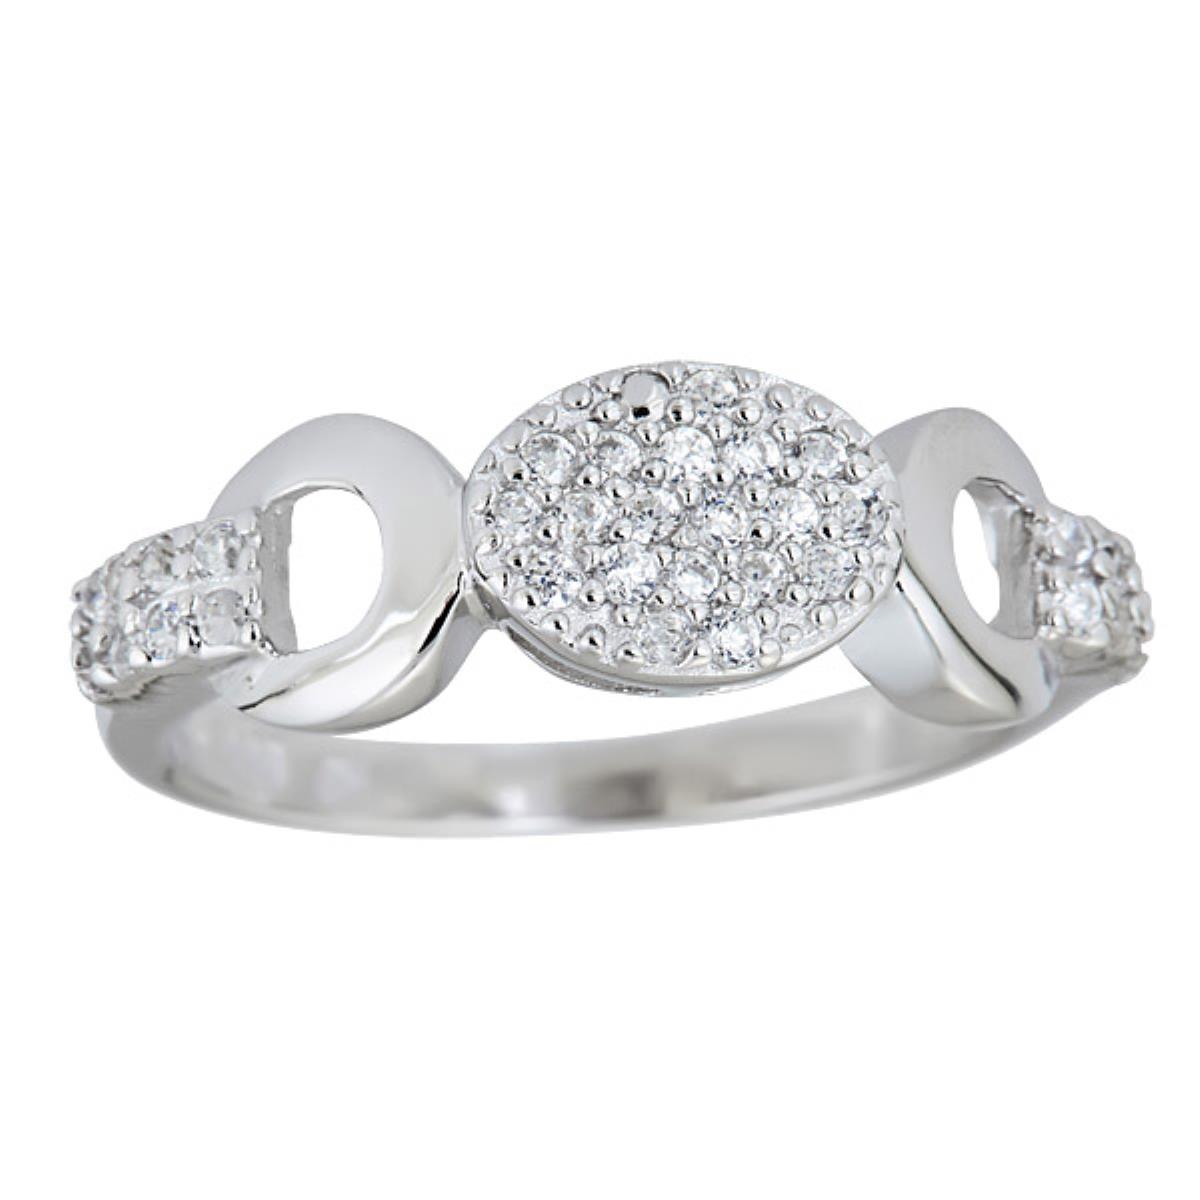 Sterling Silver Pave Fashion Ring